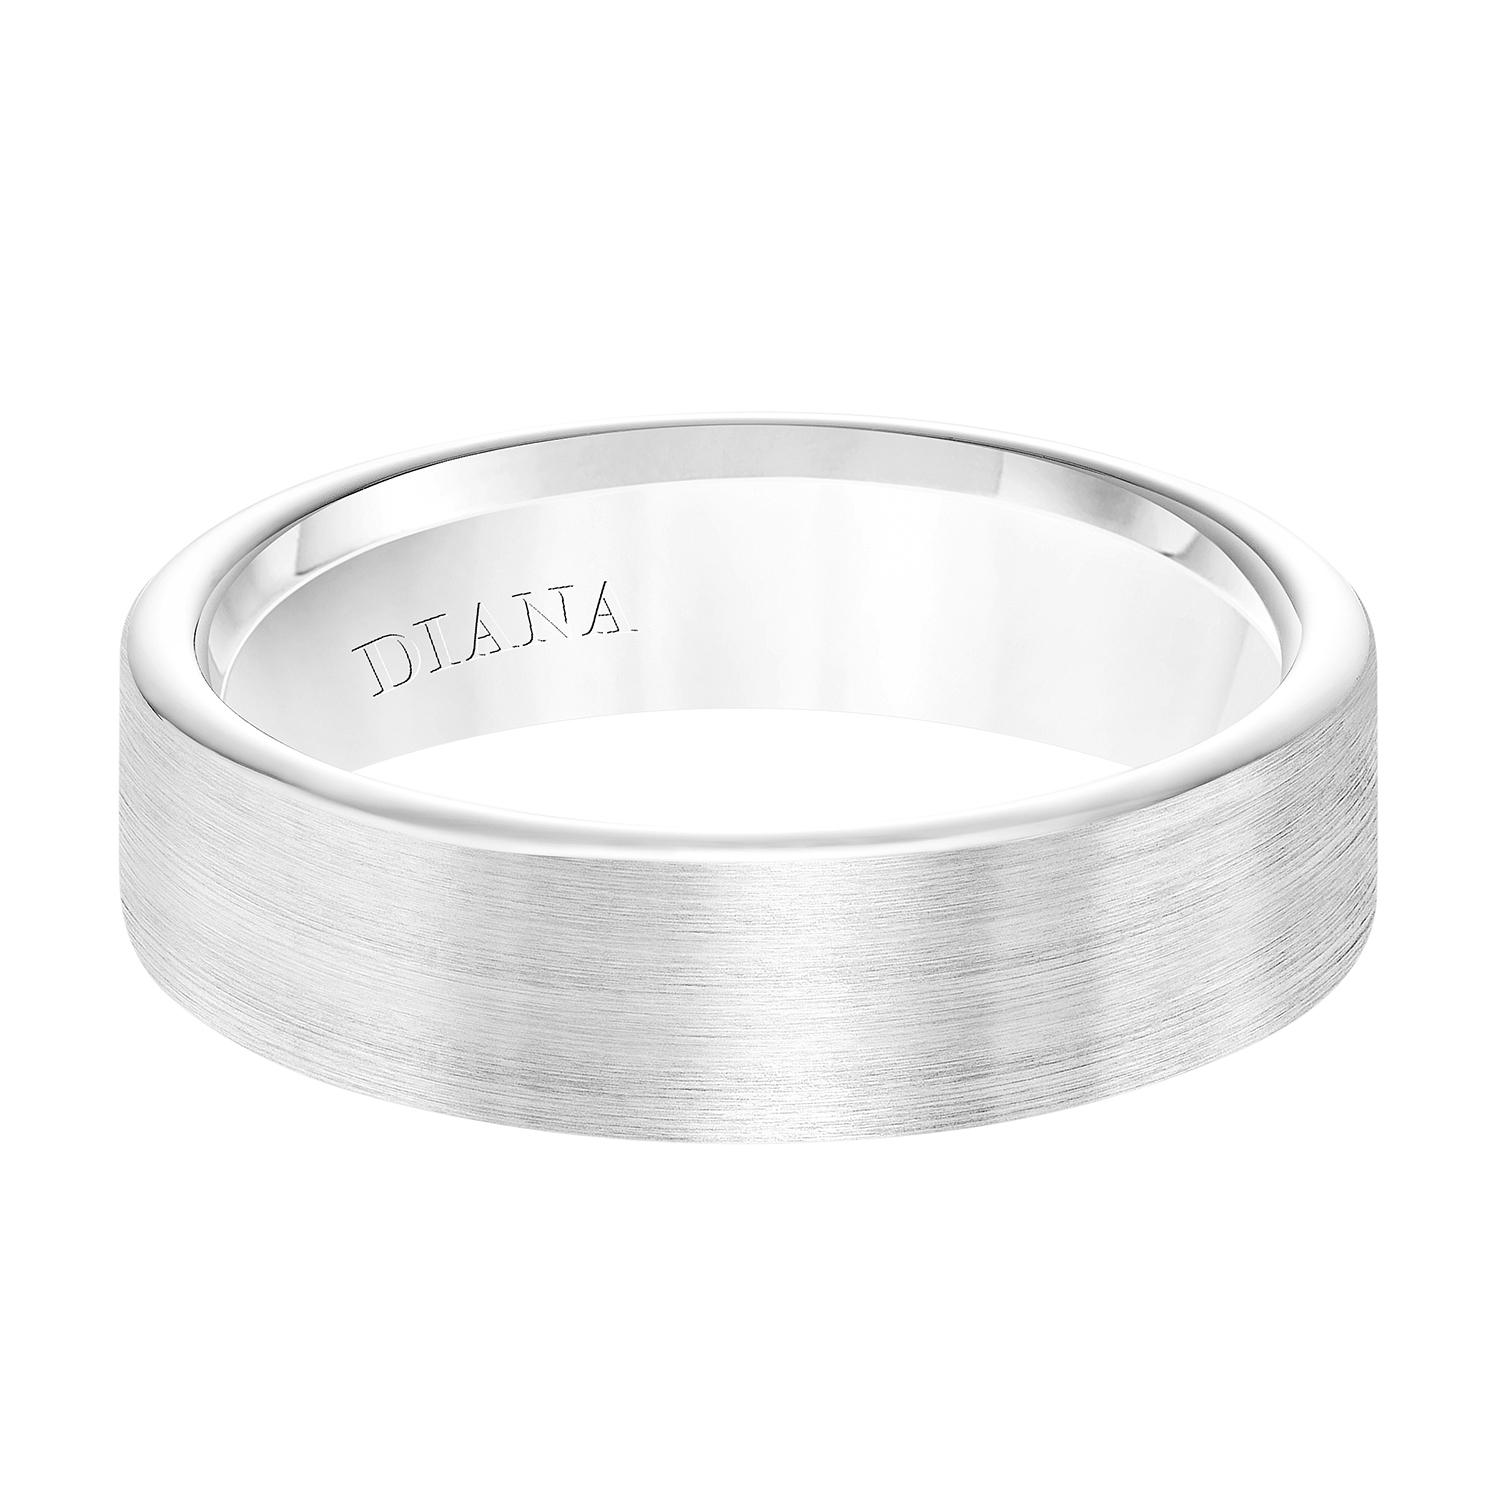 Gents 14K White Gold 6mm Wedding Band with Satin Finish